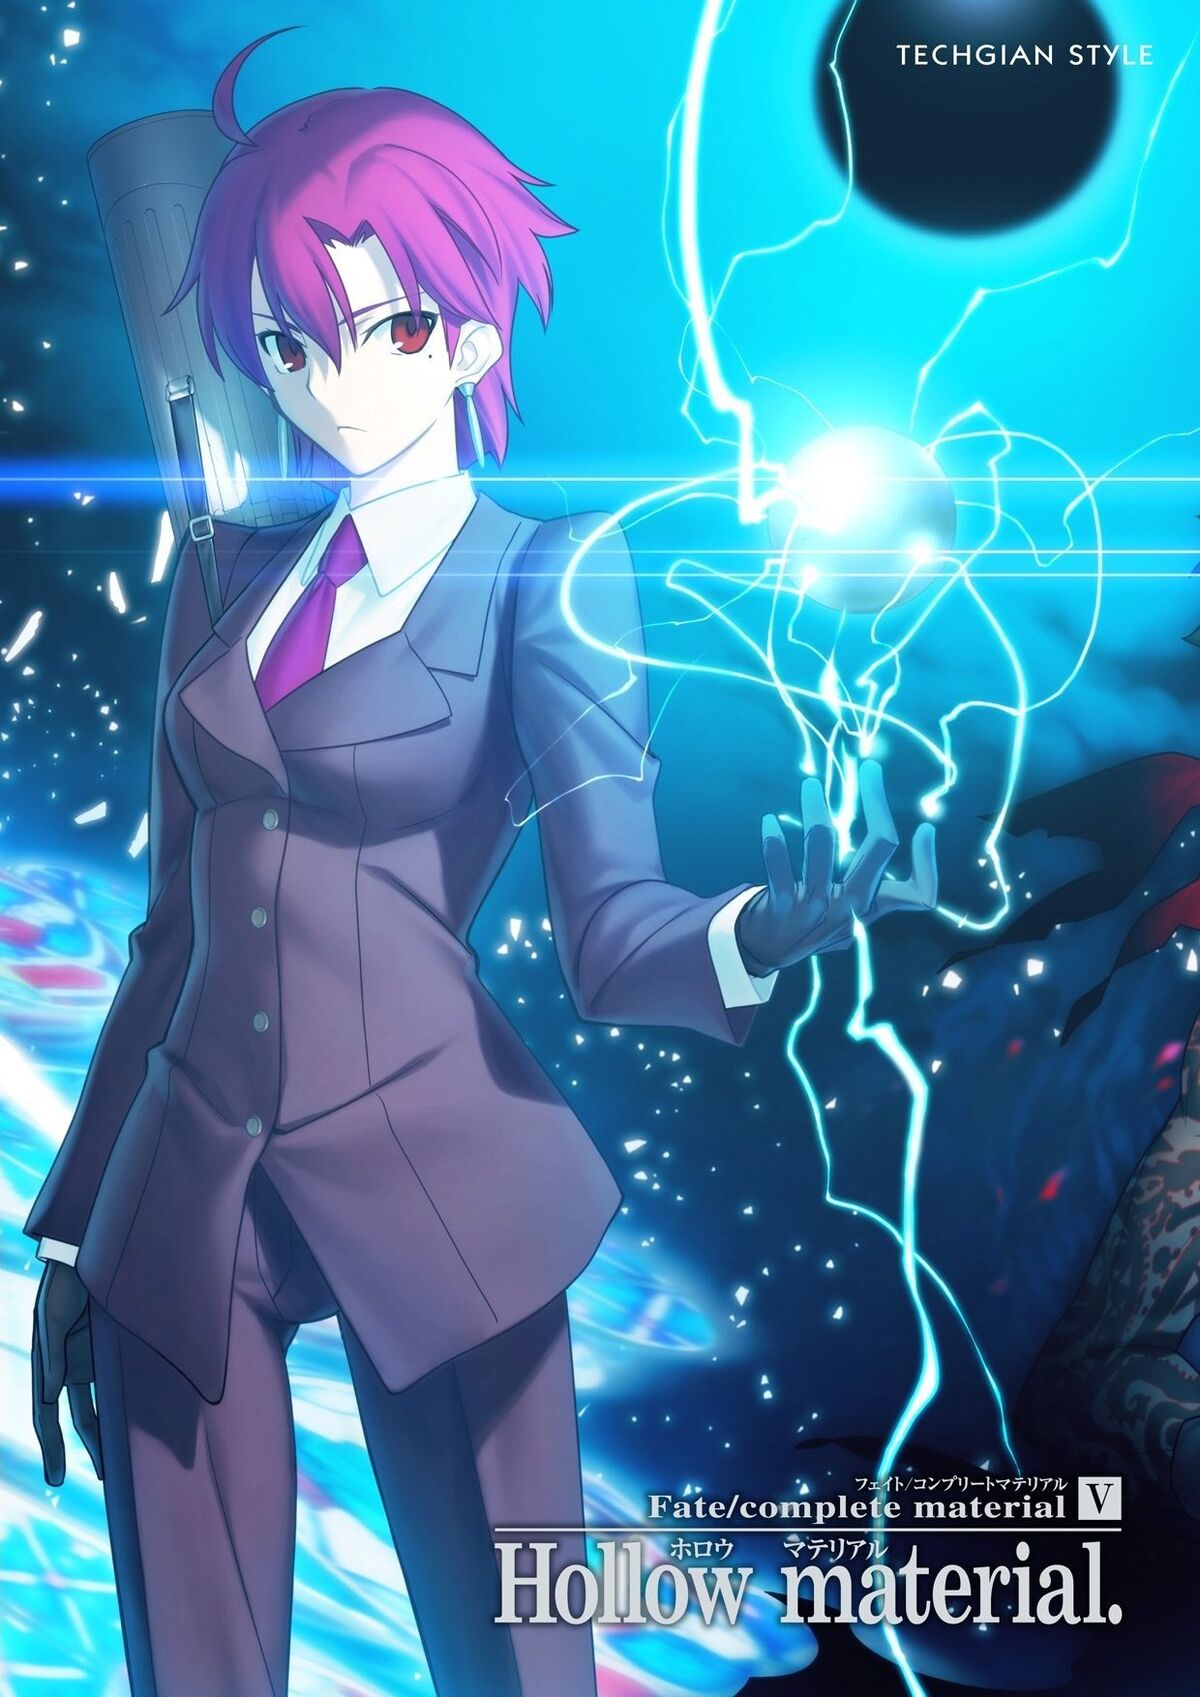 Fate/complete material V | TYPE-MOON Wiki | Fandom